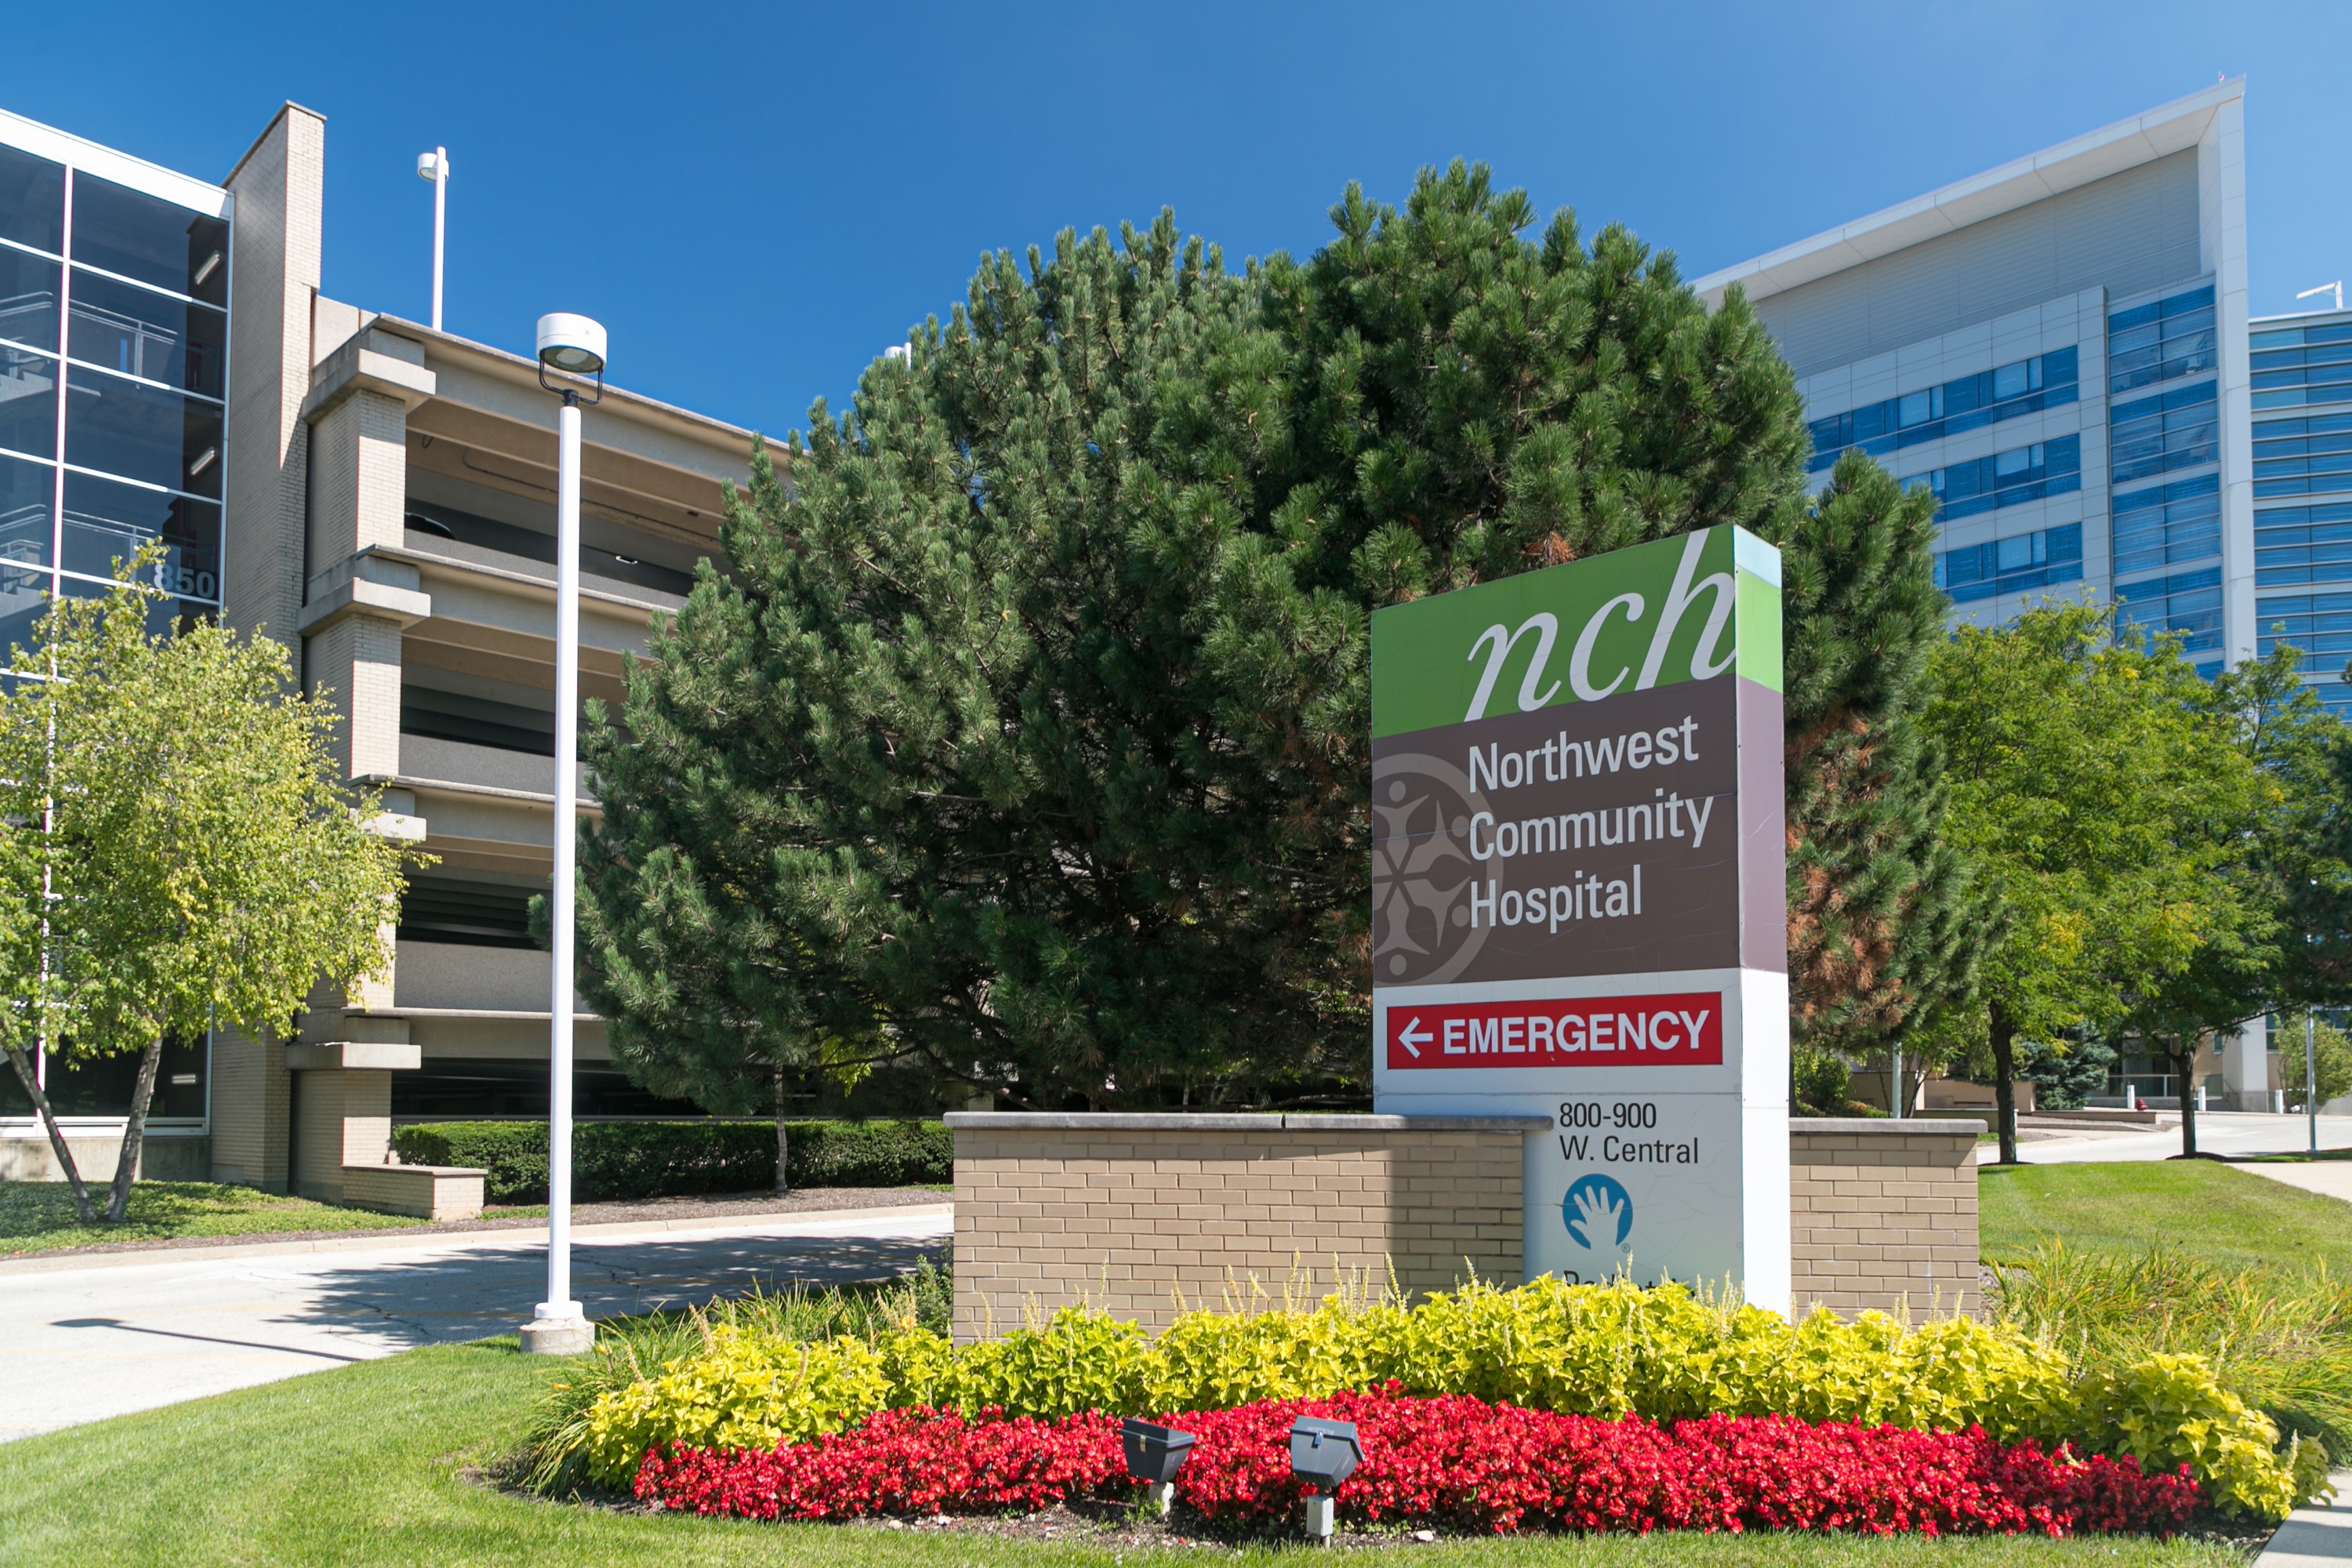 Nch Hospital And Emergency Department - Northwest Community Healthcare